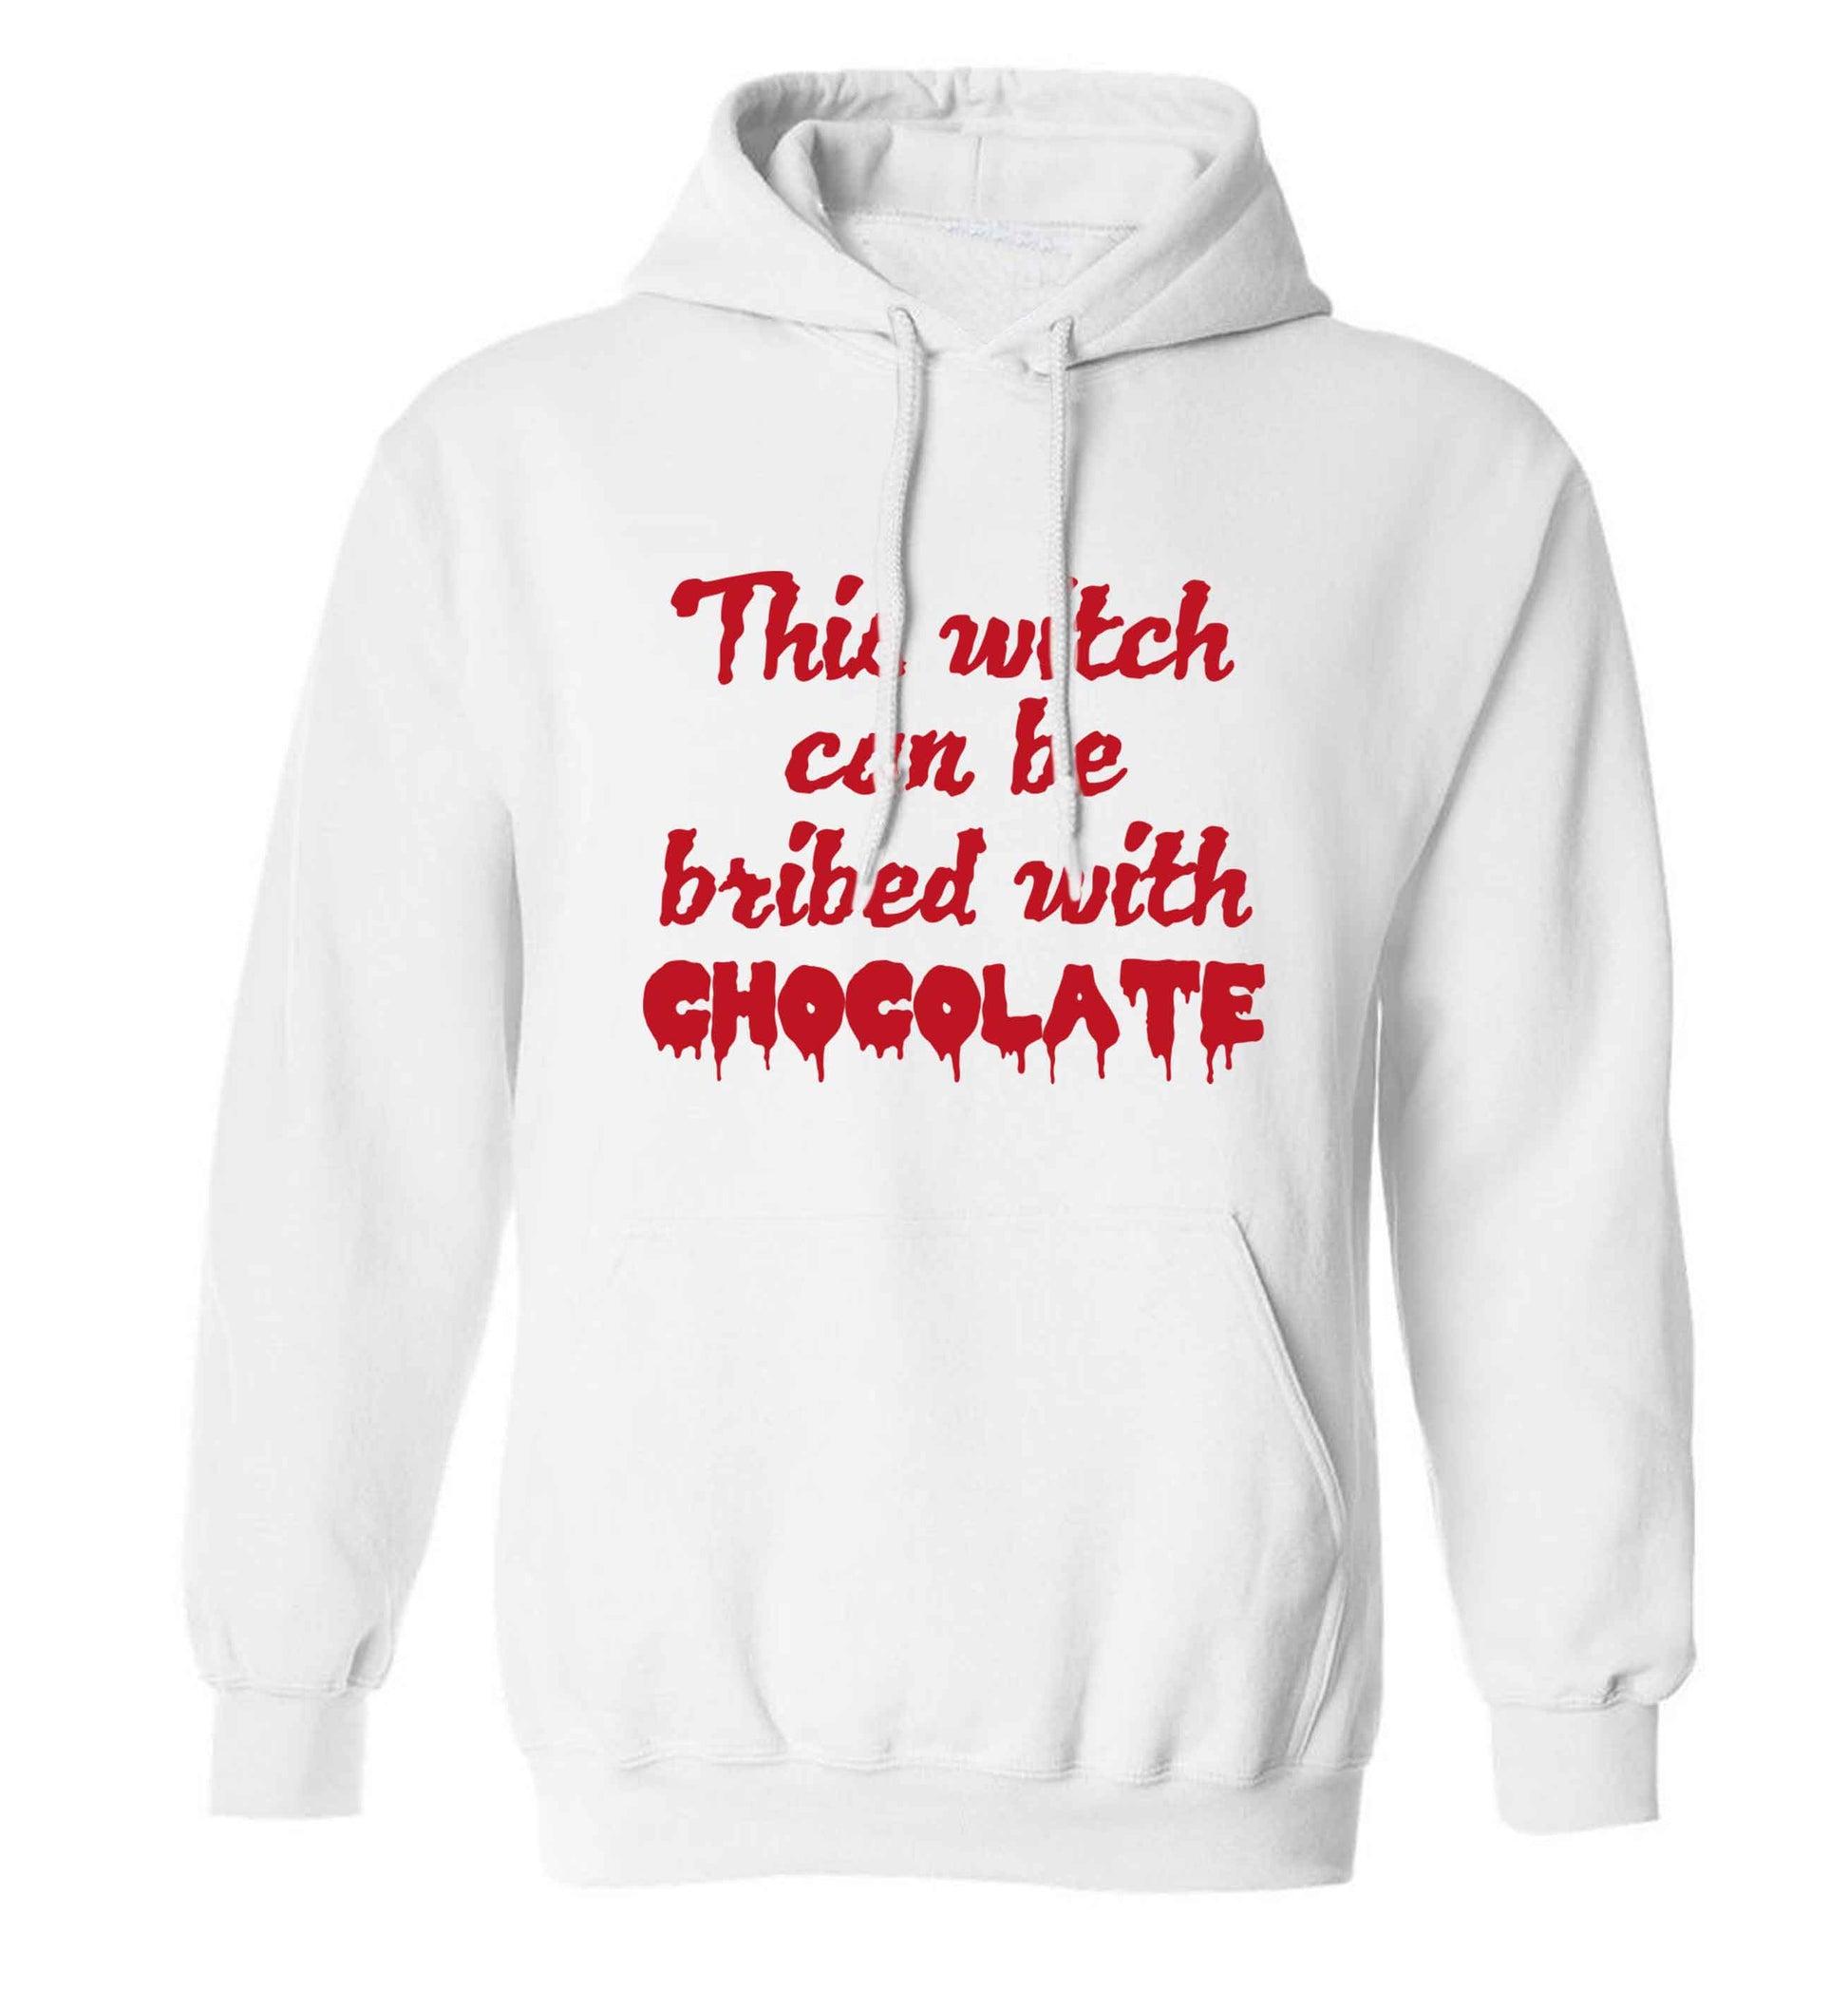 This witch can be bribed with chocolate adults unisex white hoodie 2XL